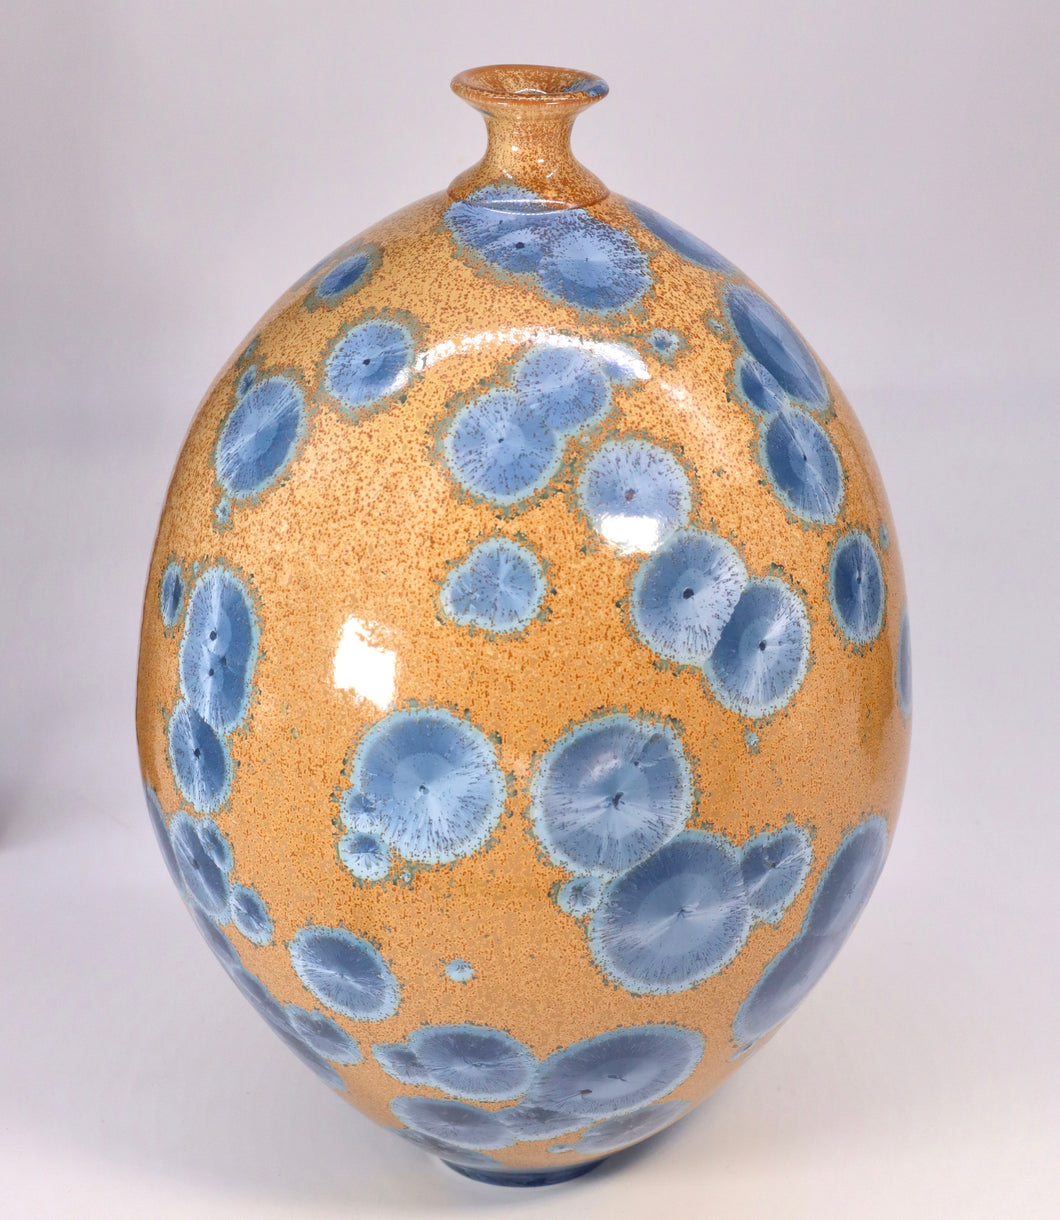 Round Bottle with Blue Crystals